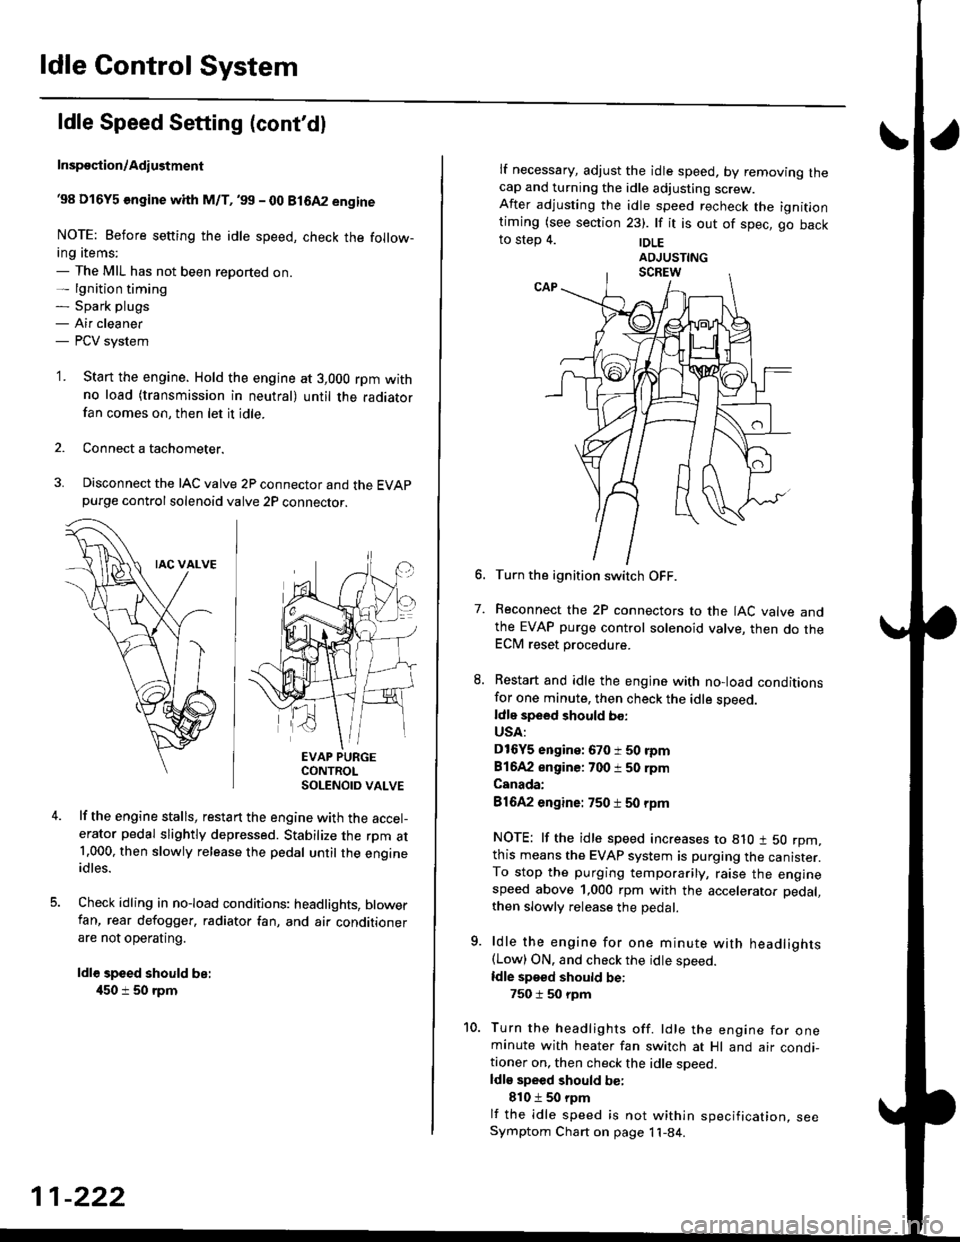 HONDA CIVIC 2000 6.G Workshop Manual ldle Control System
ldle Speed Setting (contdl
Inspeqtion/Adiustment
38 D16Y5 engine whh M/T,99 - 00 81642 engine
NOTE: Before setting the idle speed, check the follow-ing items;- The MIL has not be